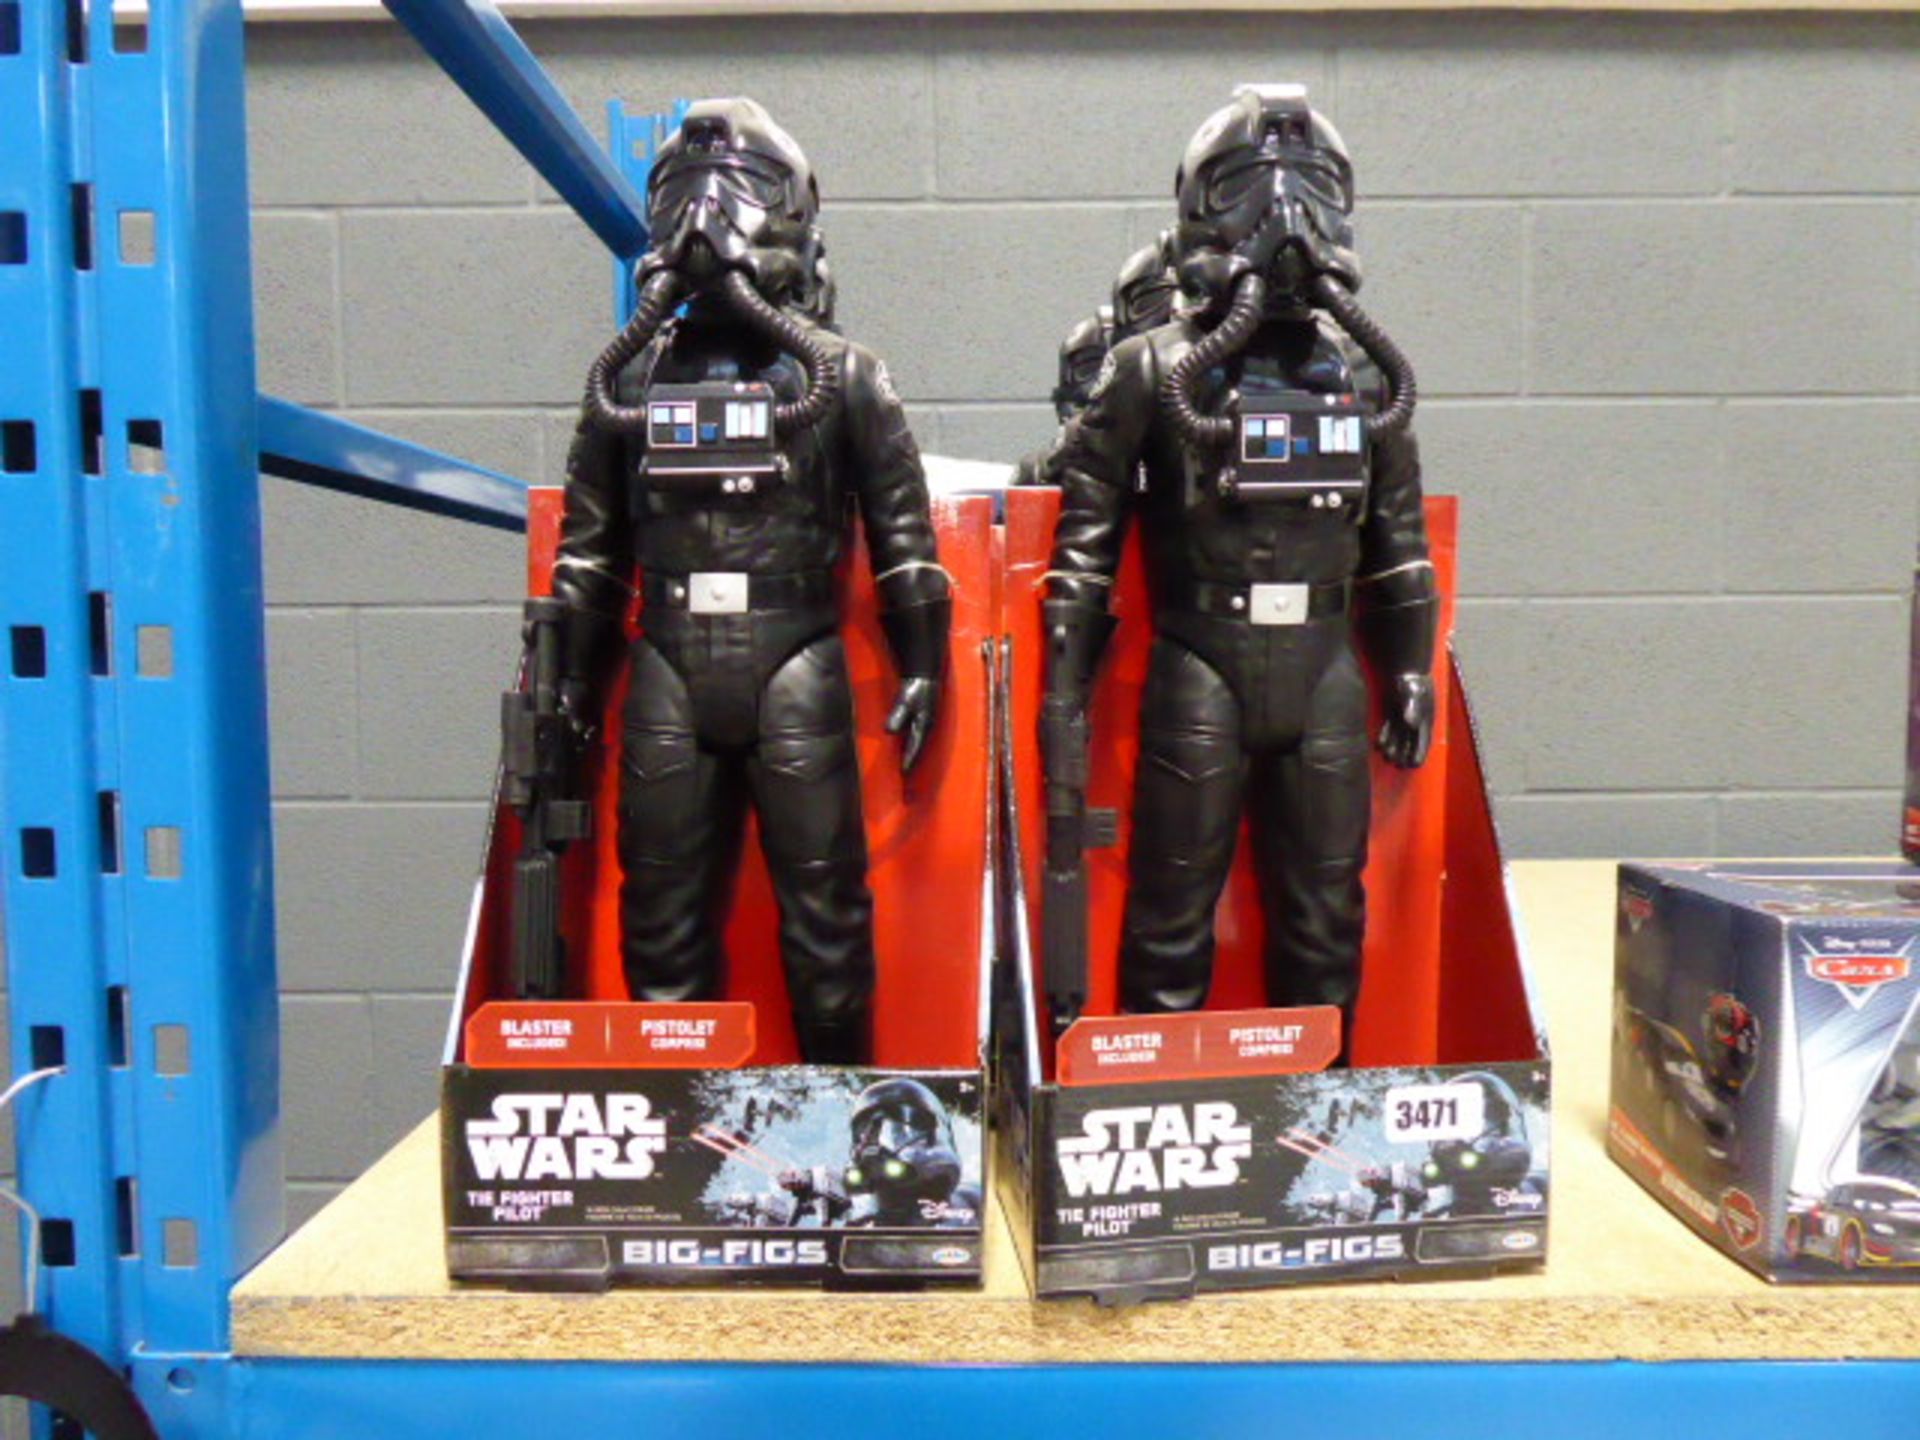 Two Star Wars fighter pilot figures